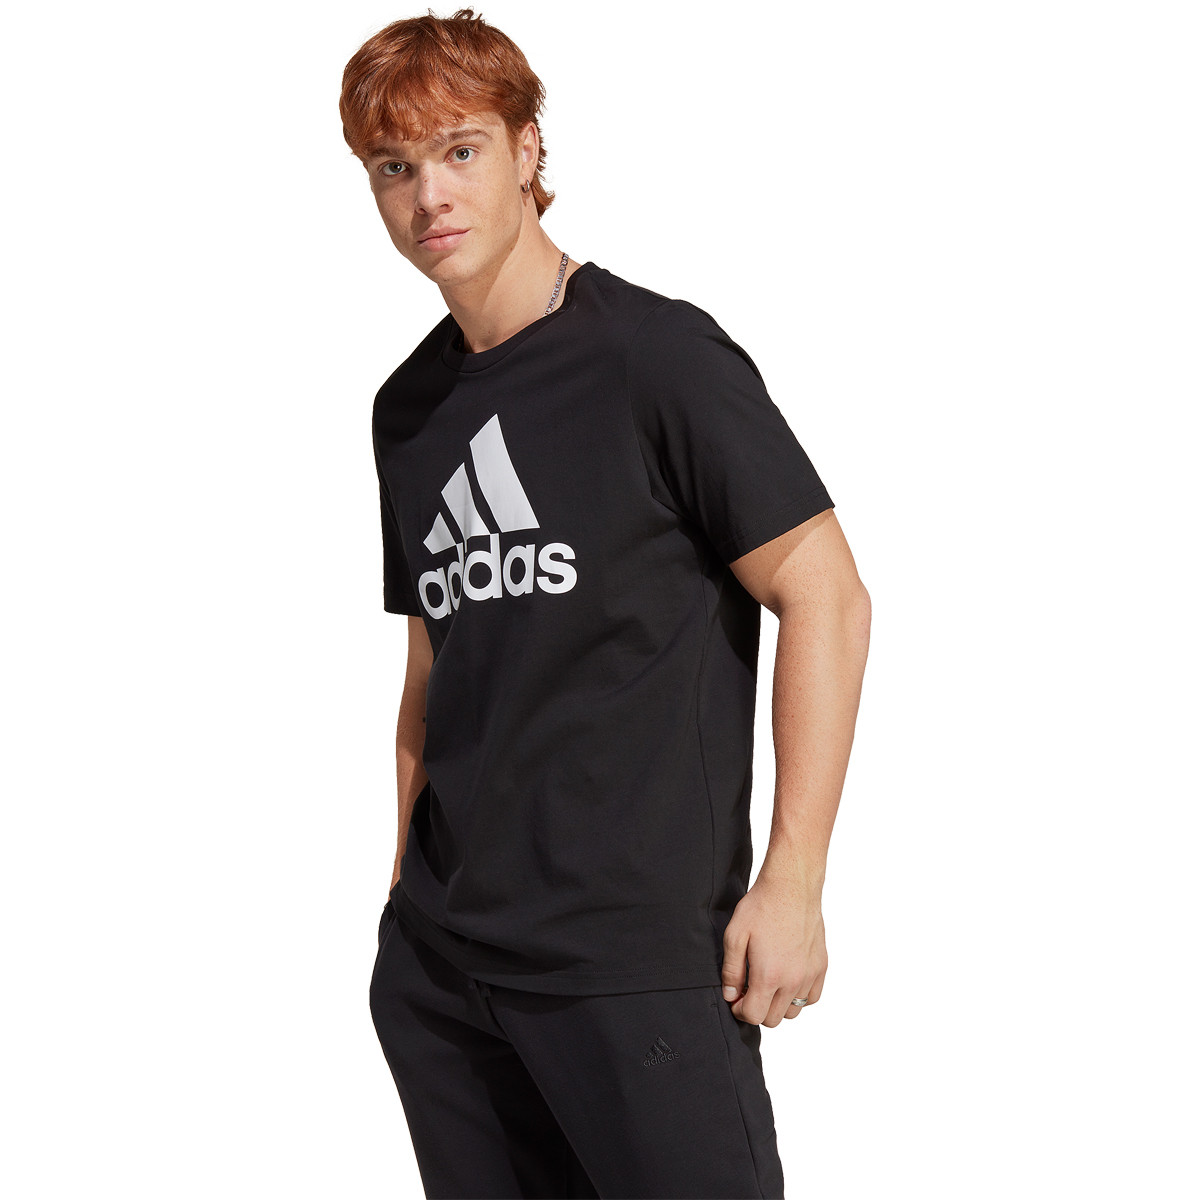 T-SHIRT ADIDAS BL WITH BRAND